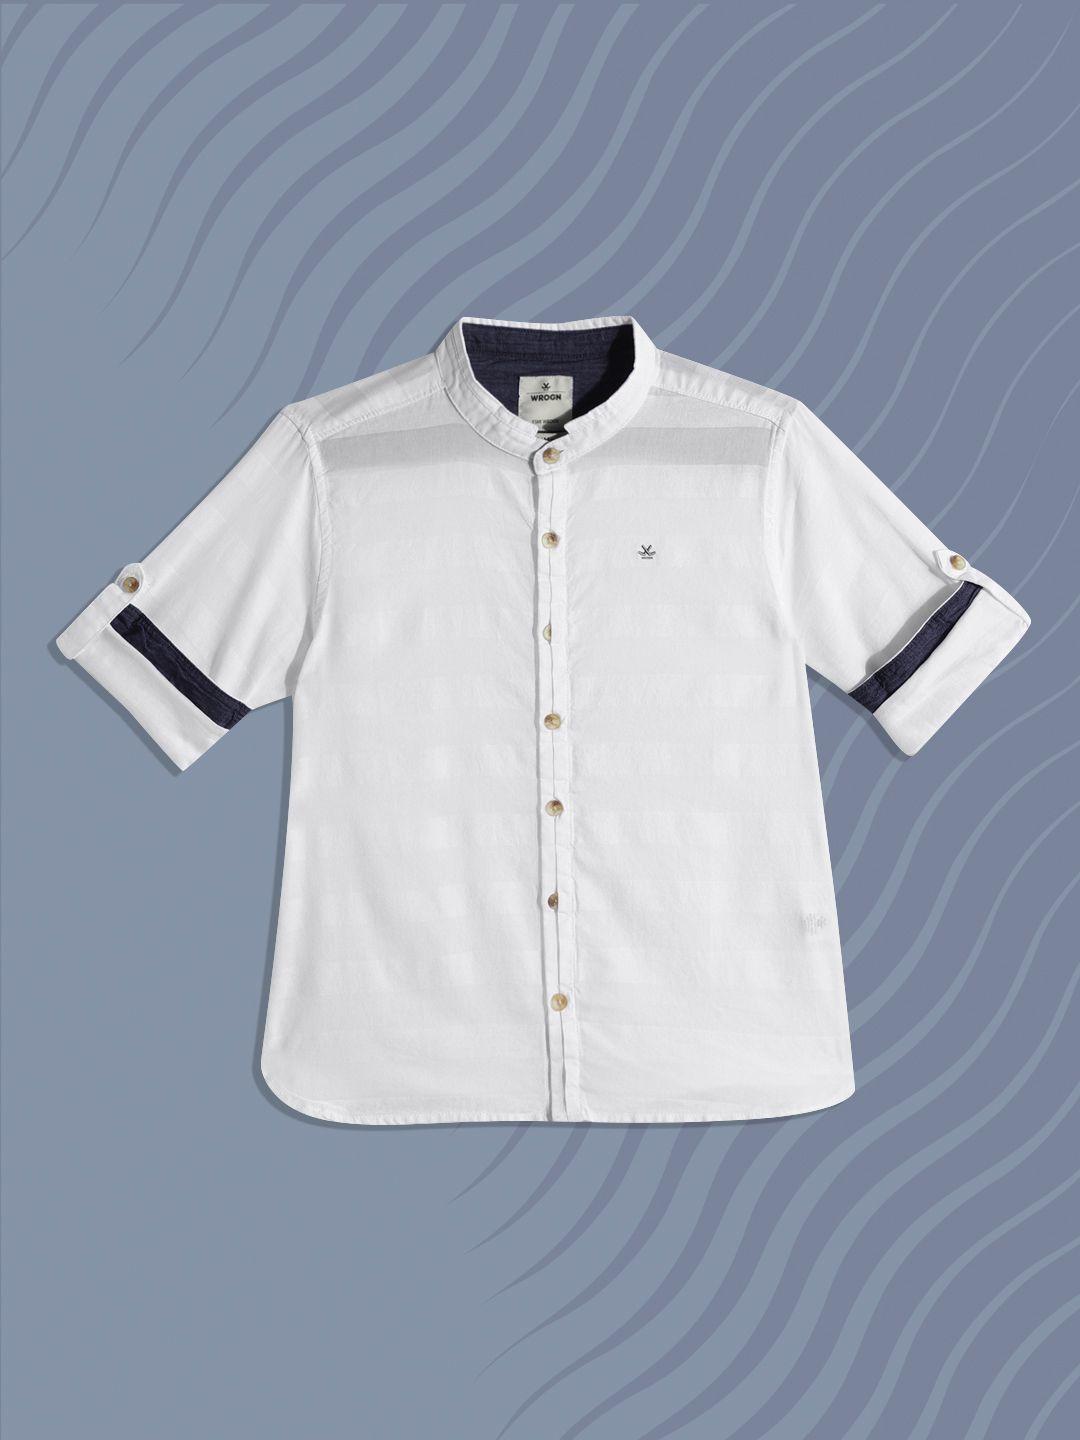 wrogn youth boys white semi sheer striped pure cotton casual shirt